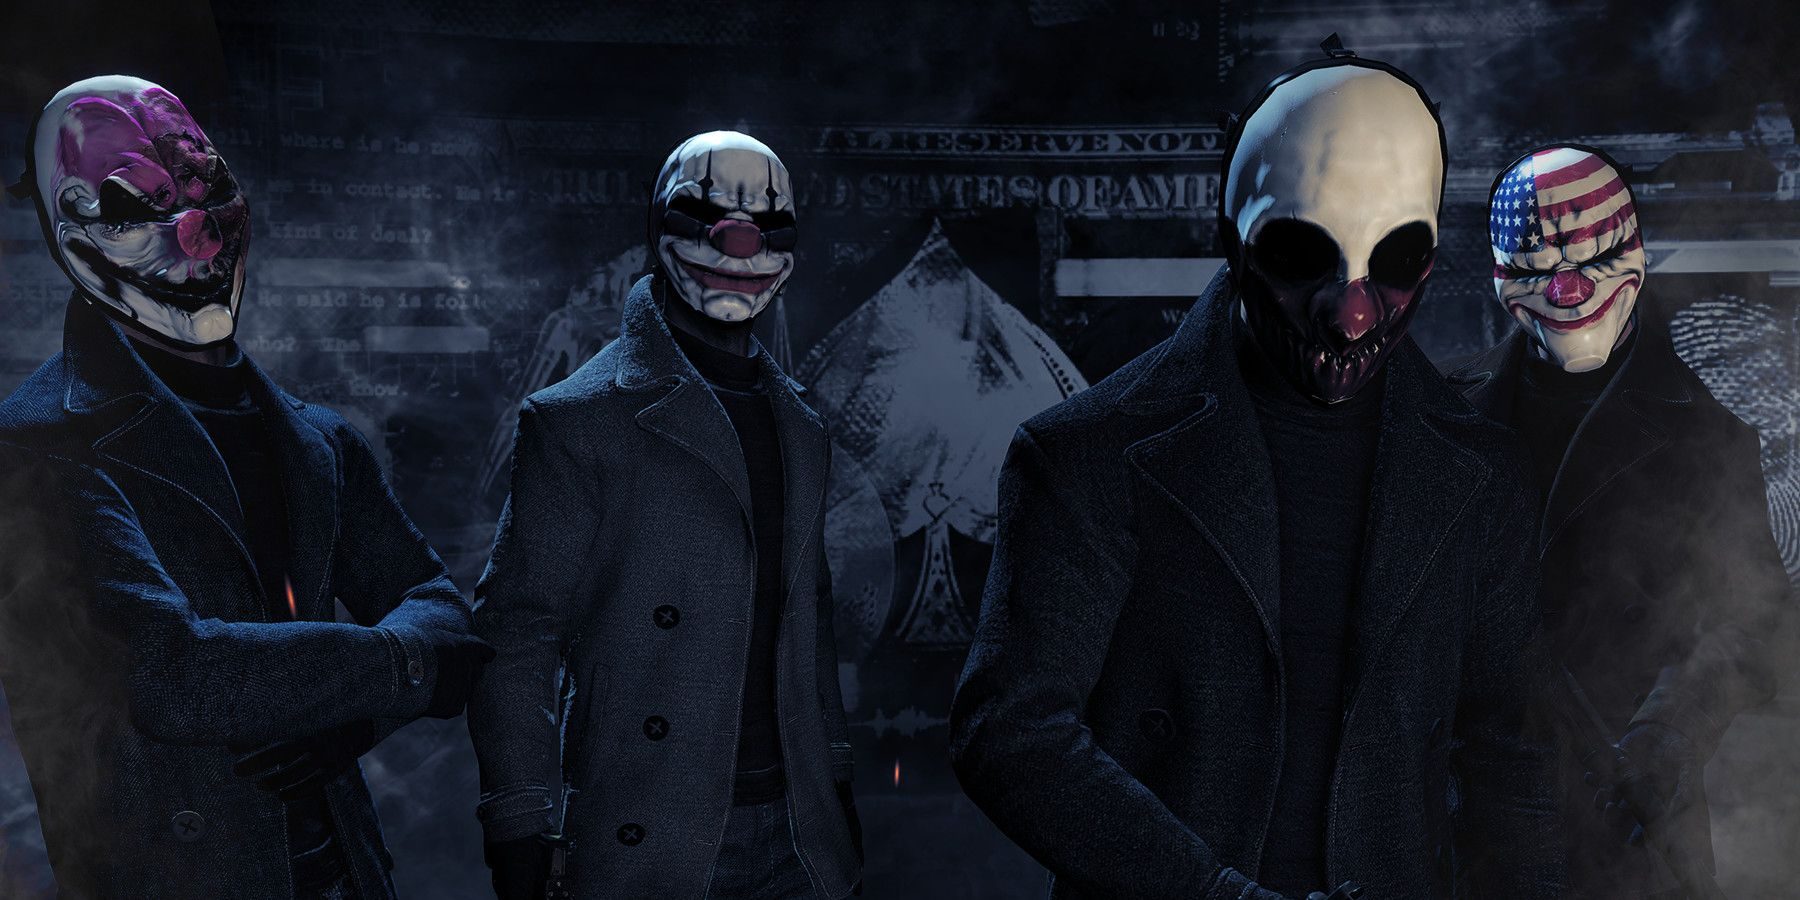 payday-2-a-group-with-clown-masks-standing-4781504